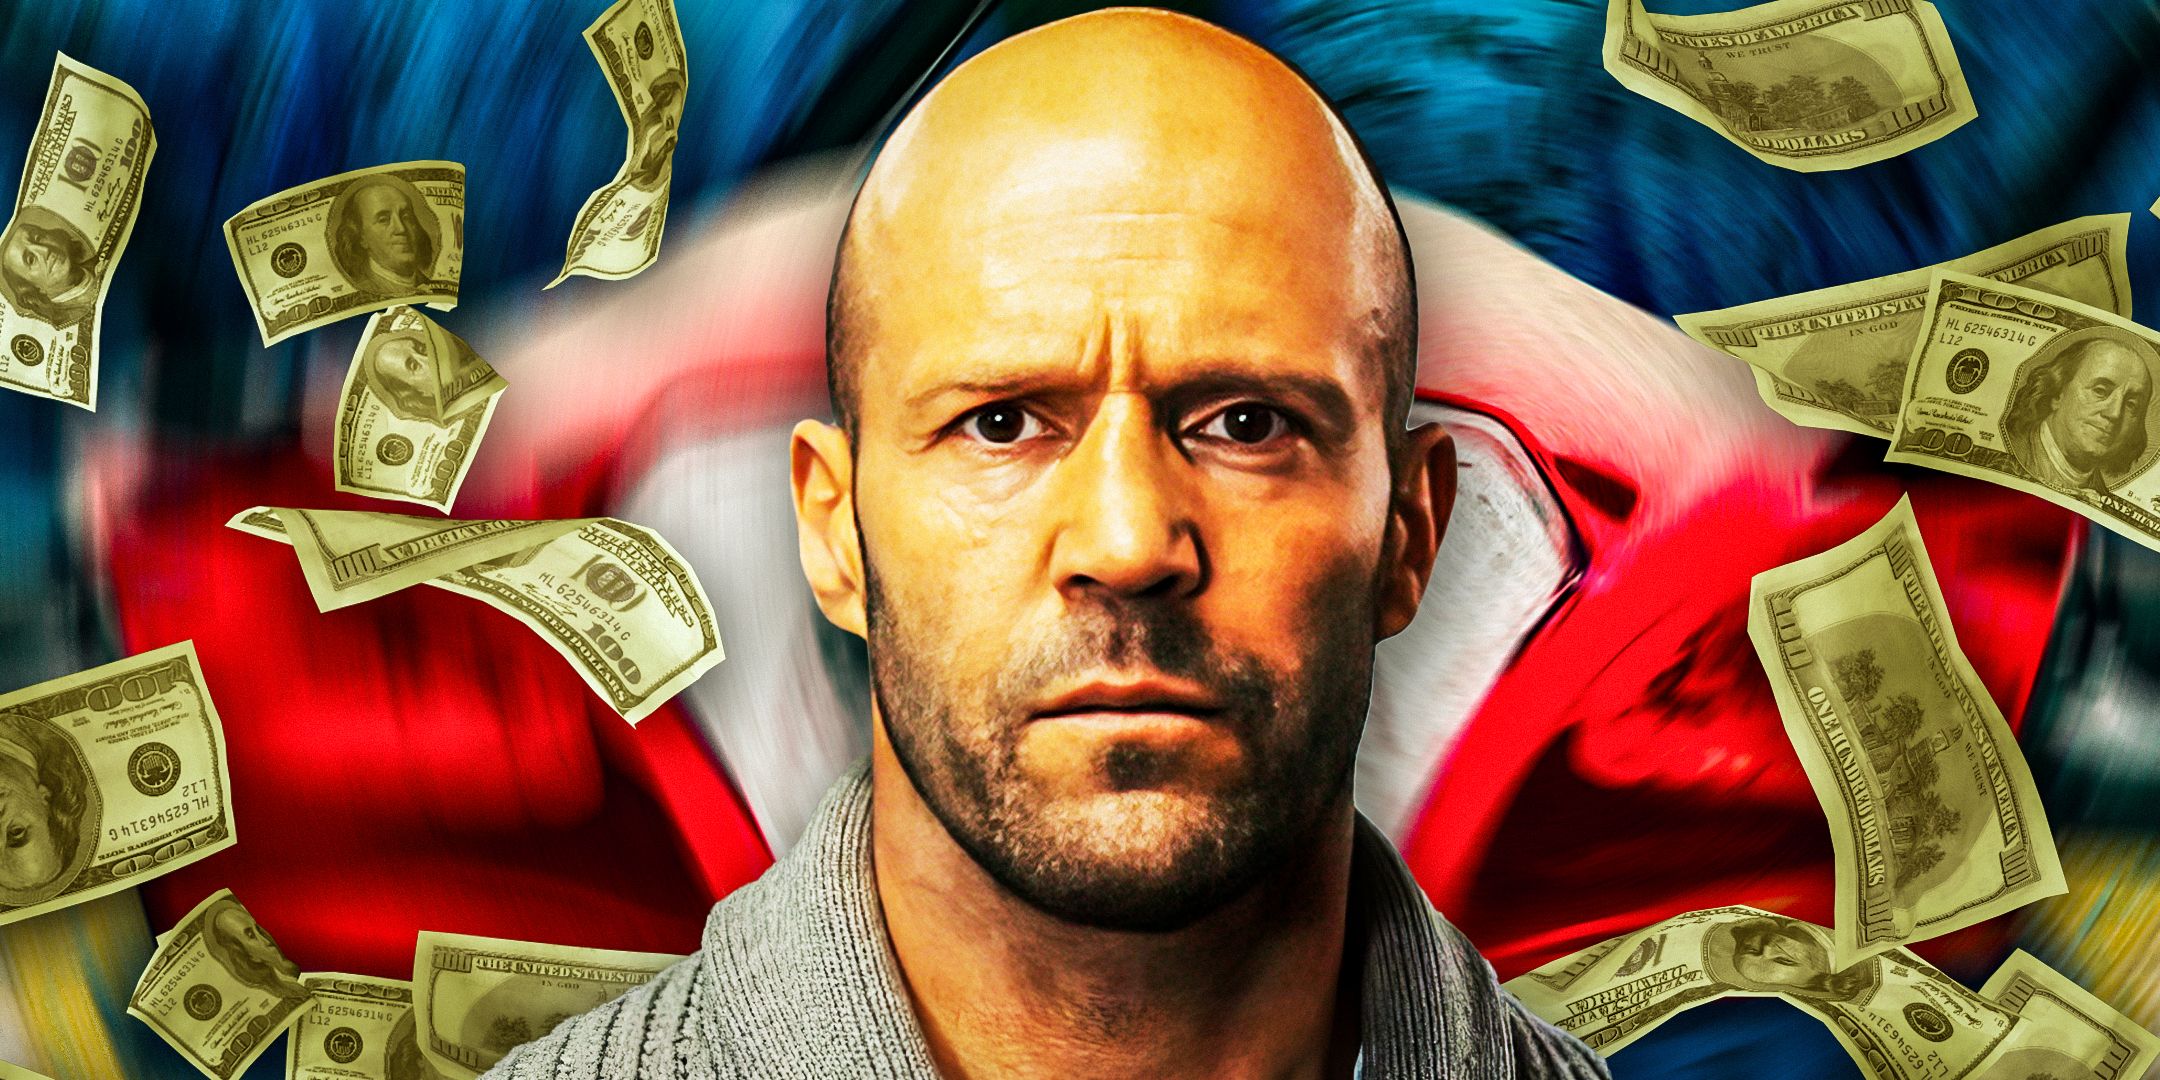 Jason-Statham-in-H-from-Wrath-of-Man-1